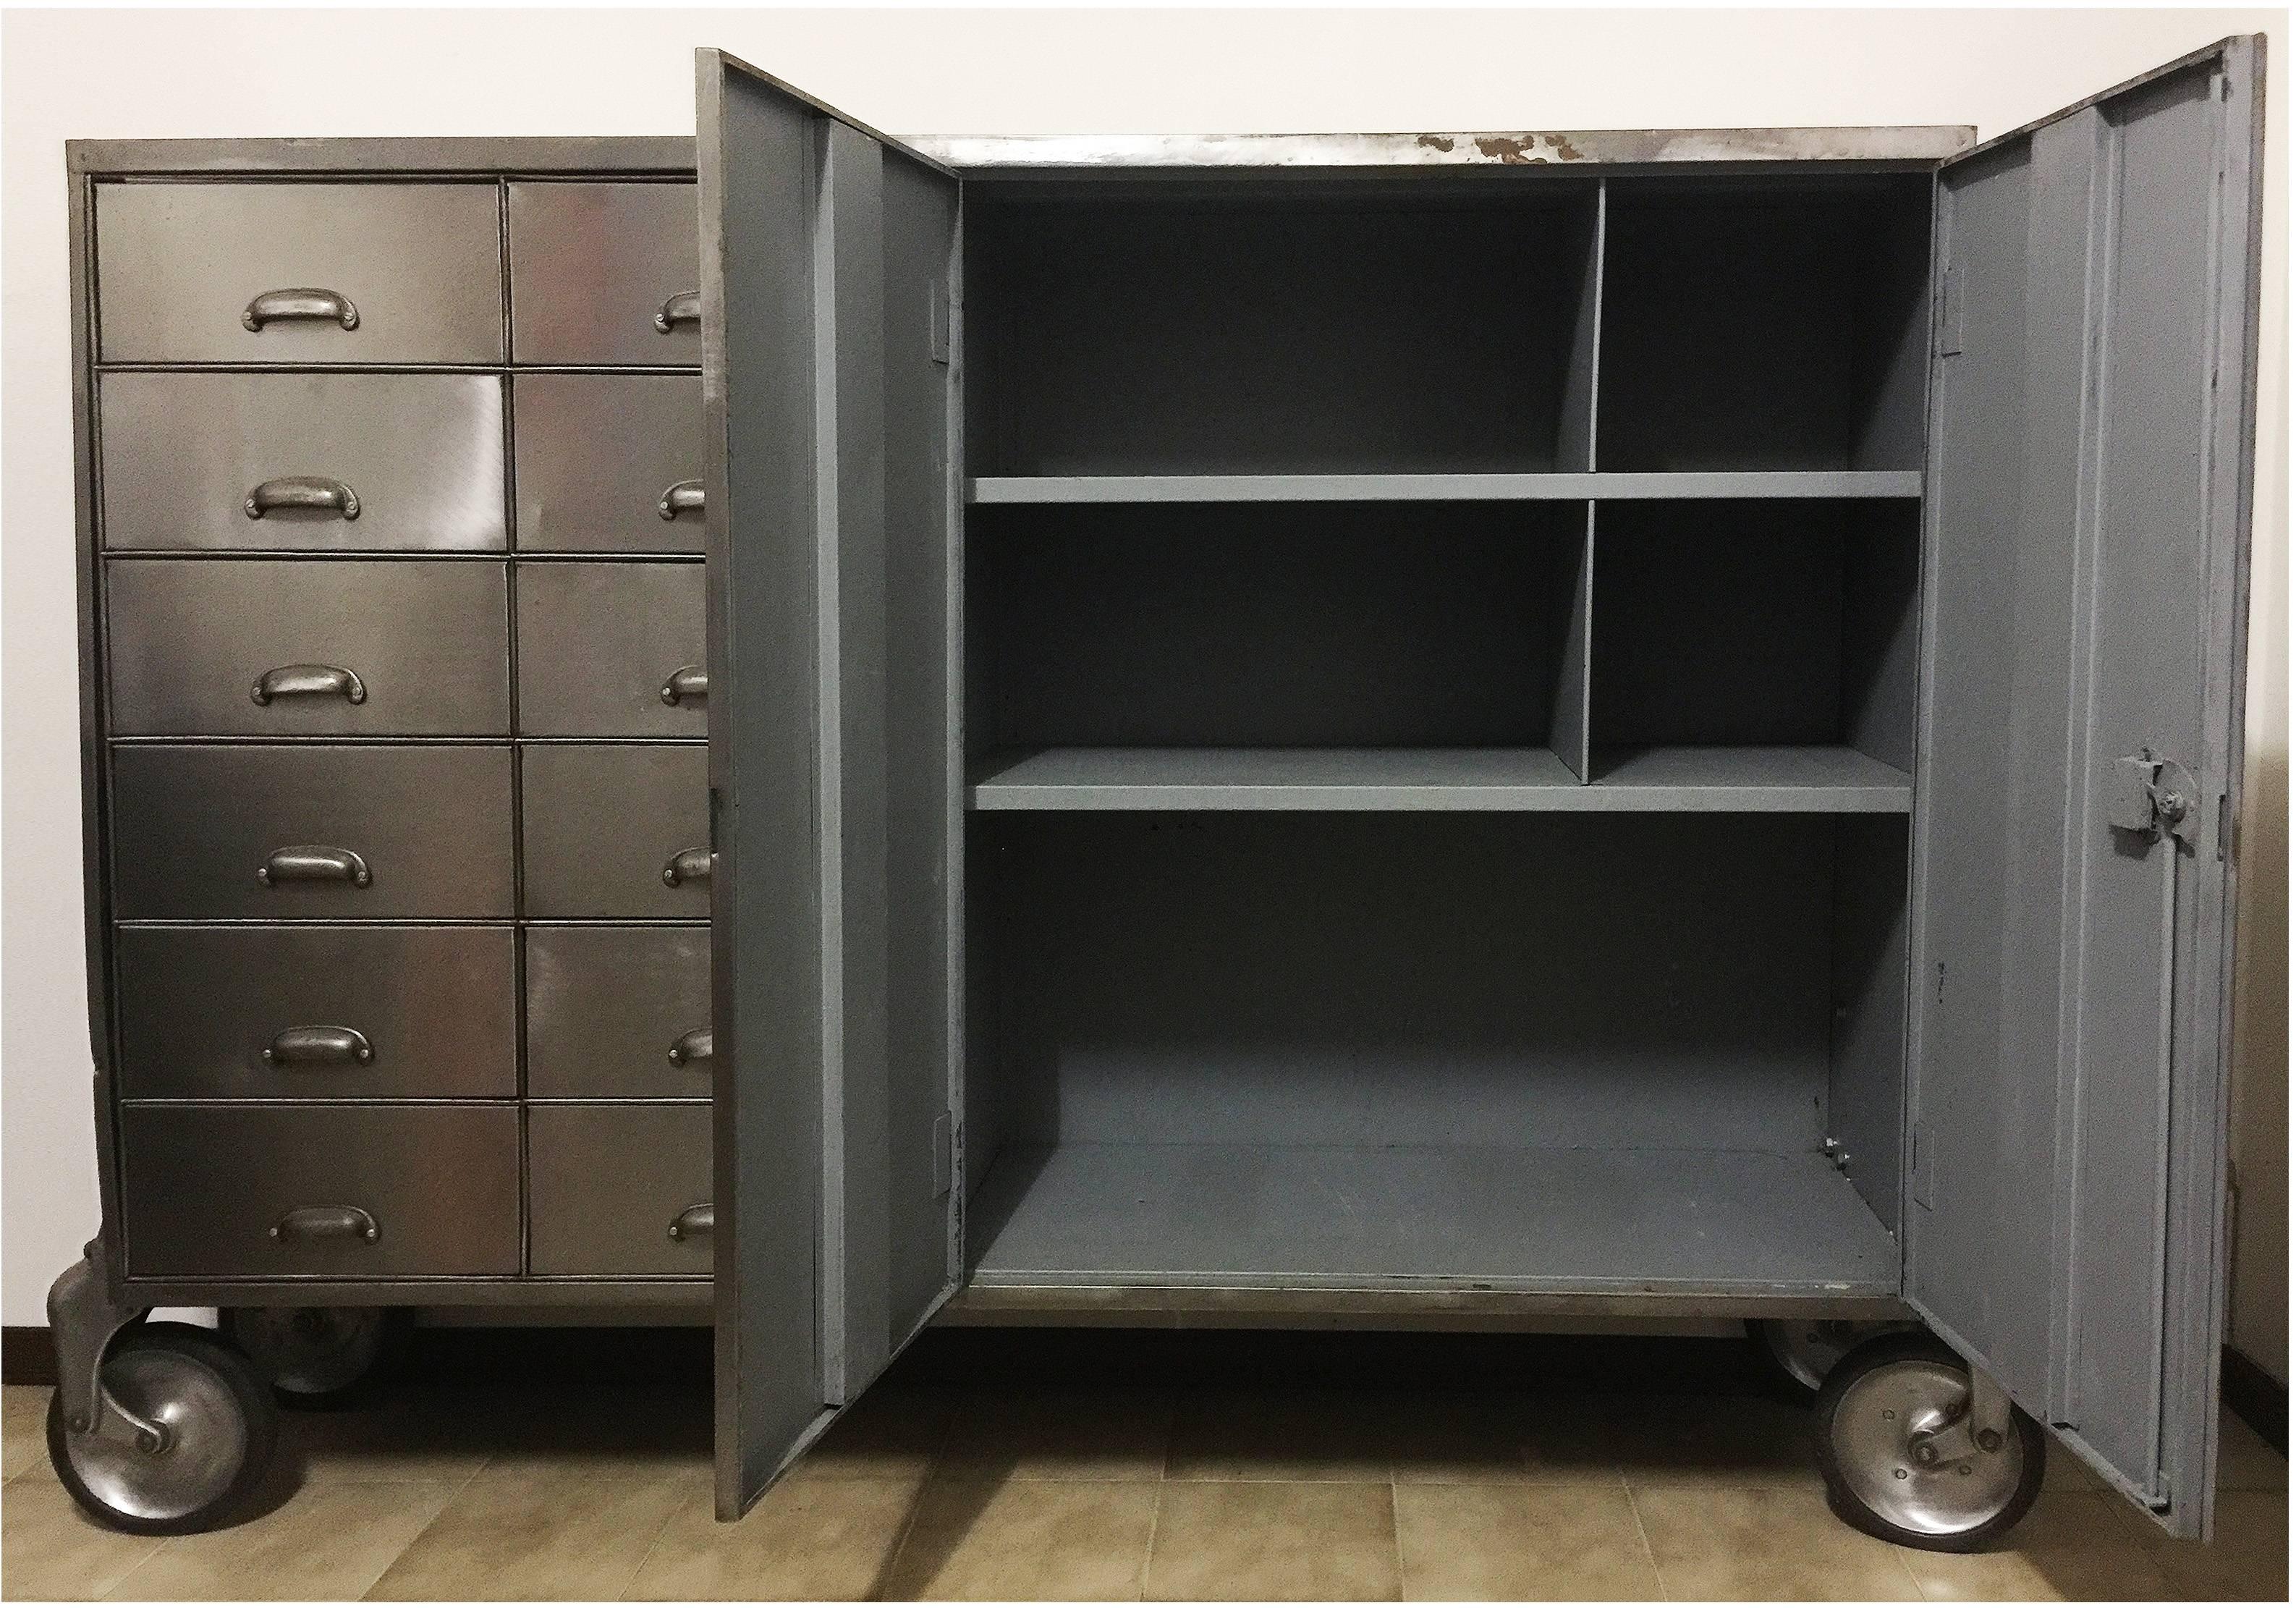 Industrial metal cabinet with unique details such as rounded cast aluminium caster brackets and pull handles.
12 storage drawers and double doors with internal shelf and dividers.
The cabinet was purchased from Castle Gibson in the U.K. in 1999.